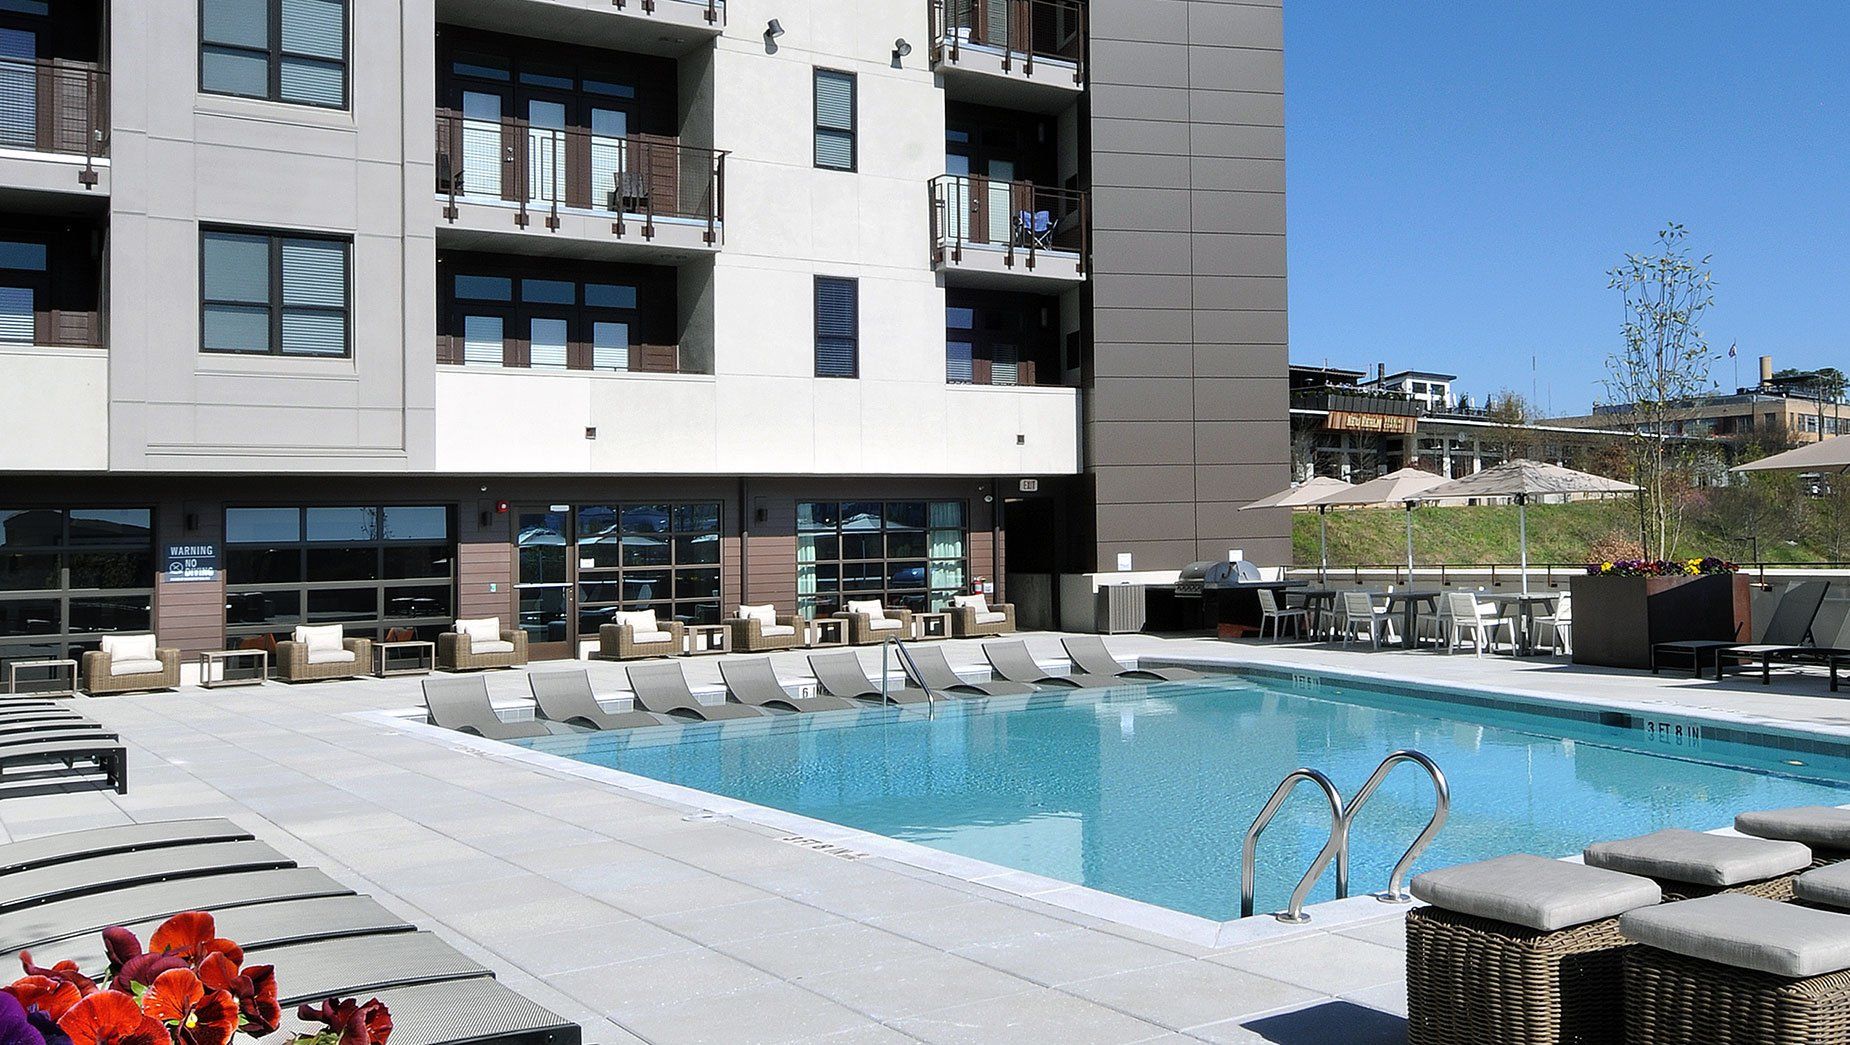 Poolside View with Apartment Buildings and Walking Trail at North and Line